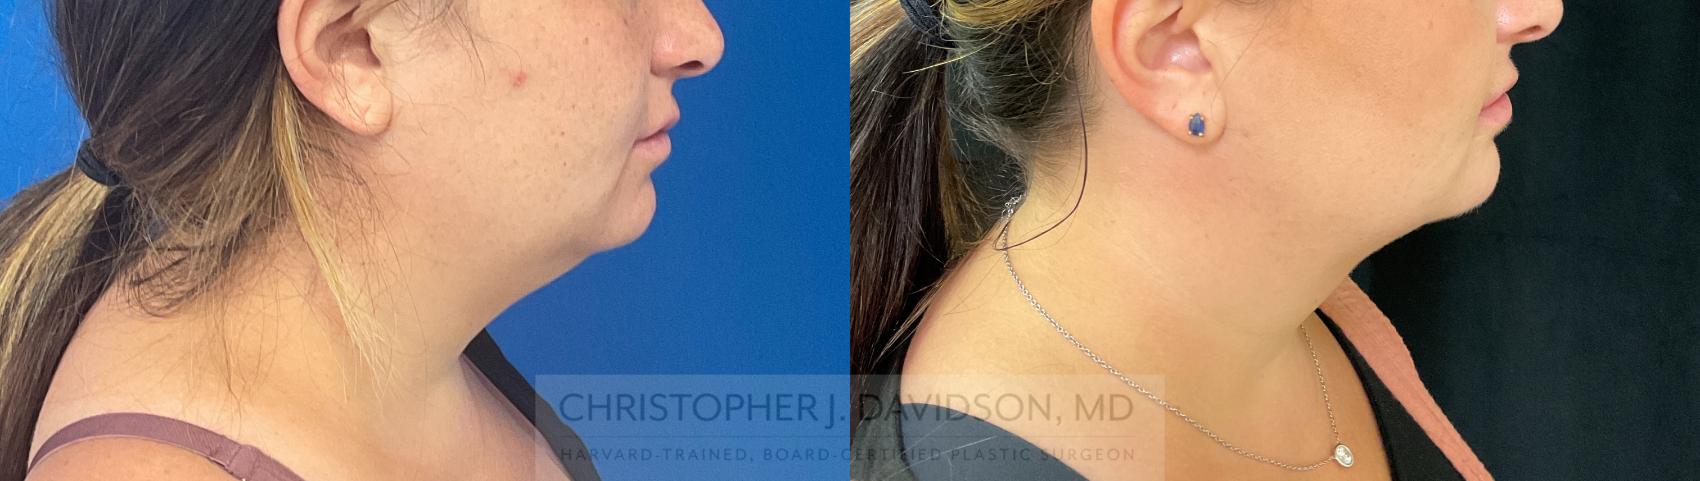 Submental Liposuction Case 281 Before & After Right Side | Boston, MA | Christopher J. Davidson, MD